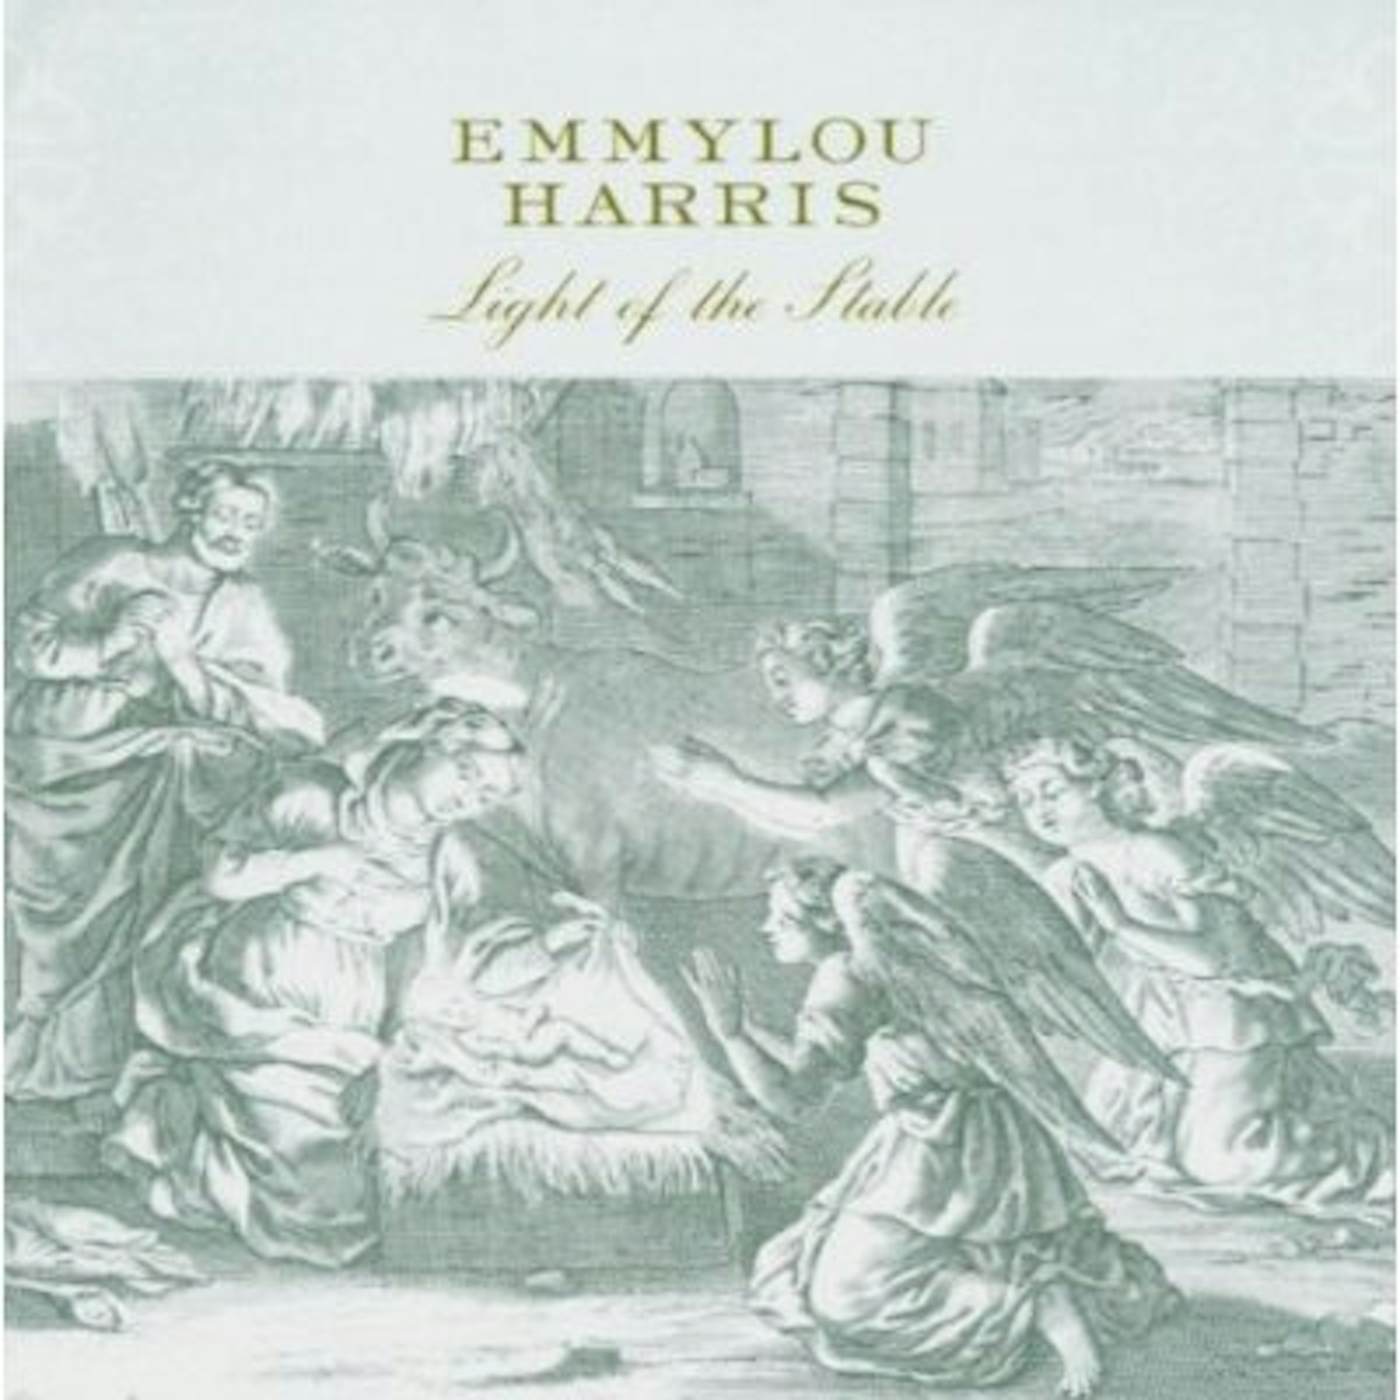 Emmylou Harris LIGHT OF THE STABLE CD